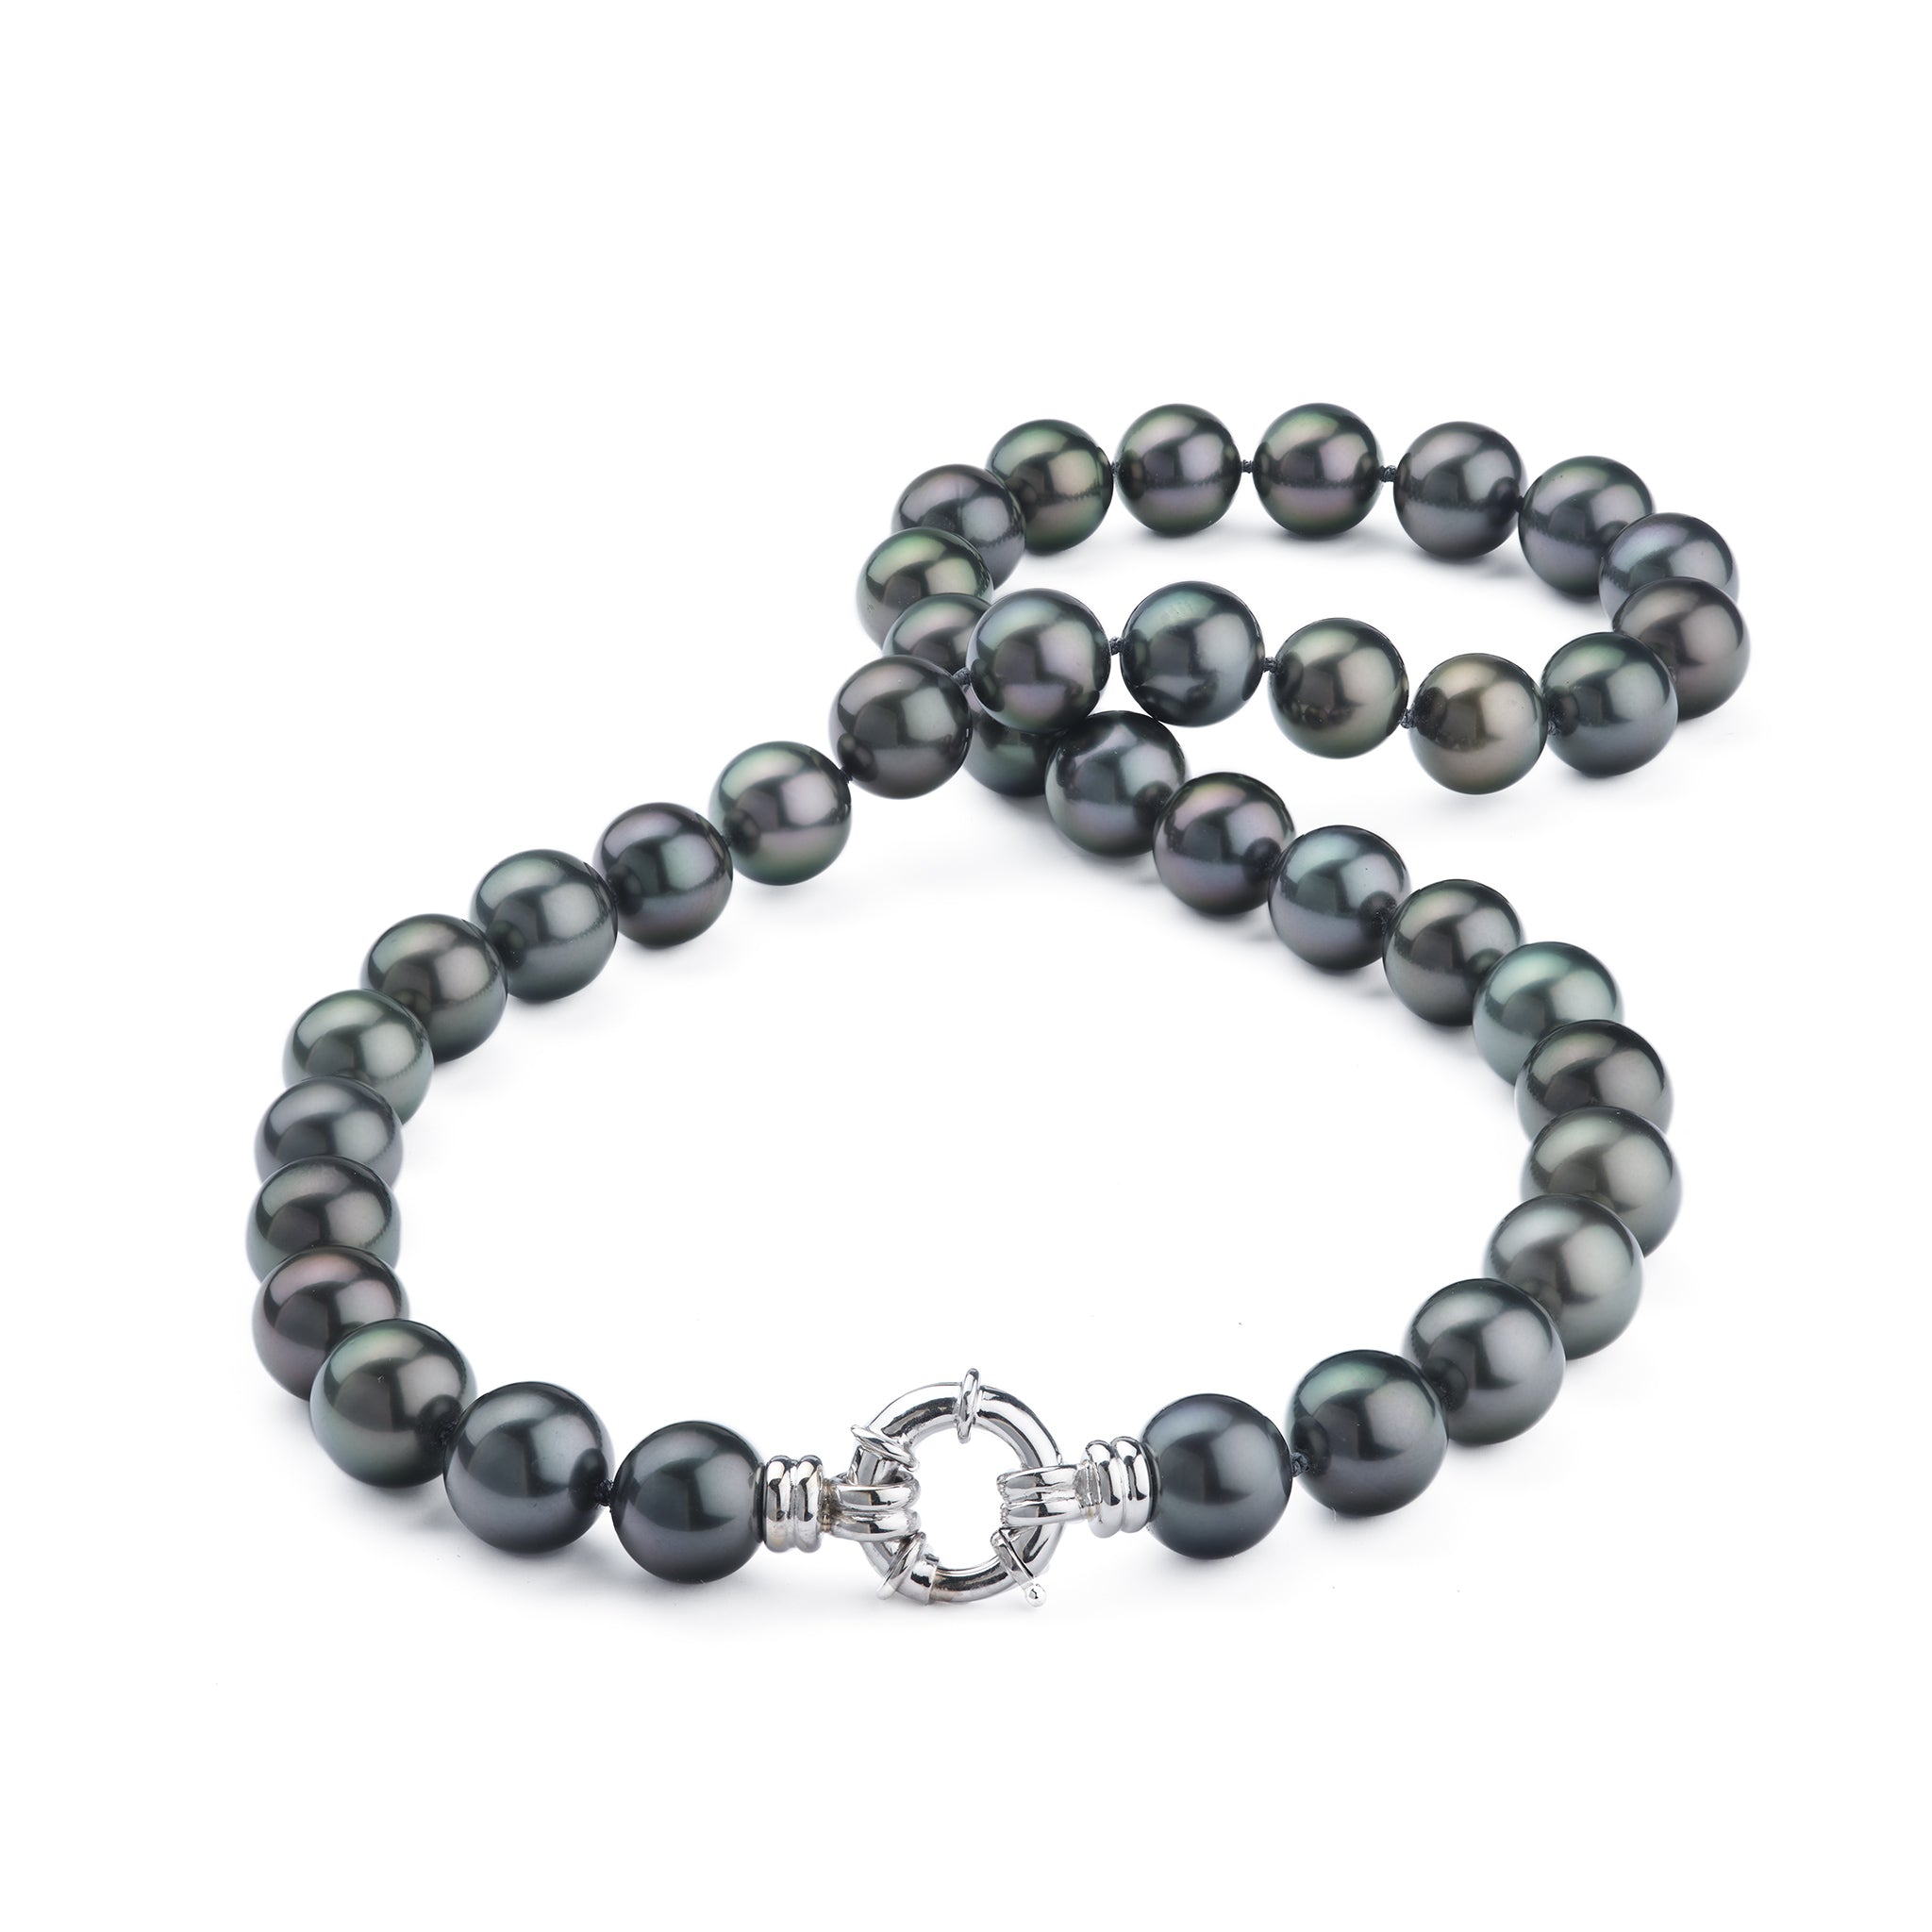 33 Ombre South Sea White Pearl and Tahitian Black Pearl Strand